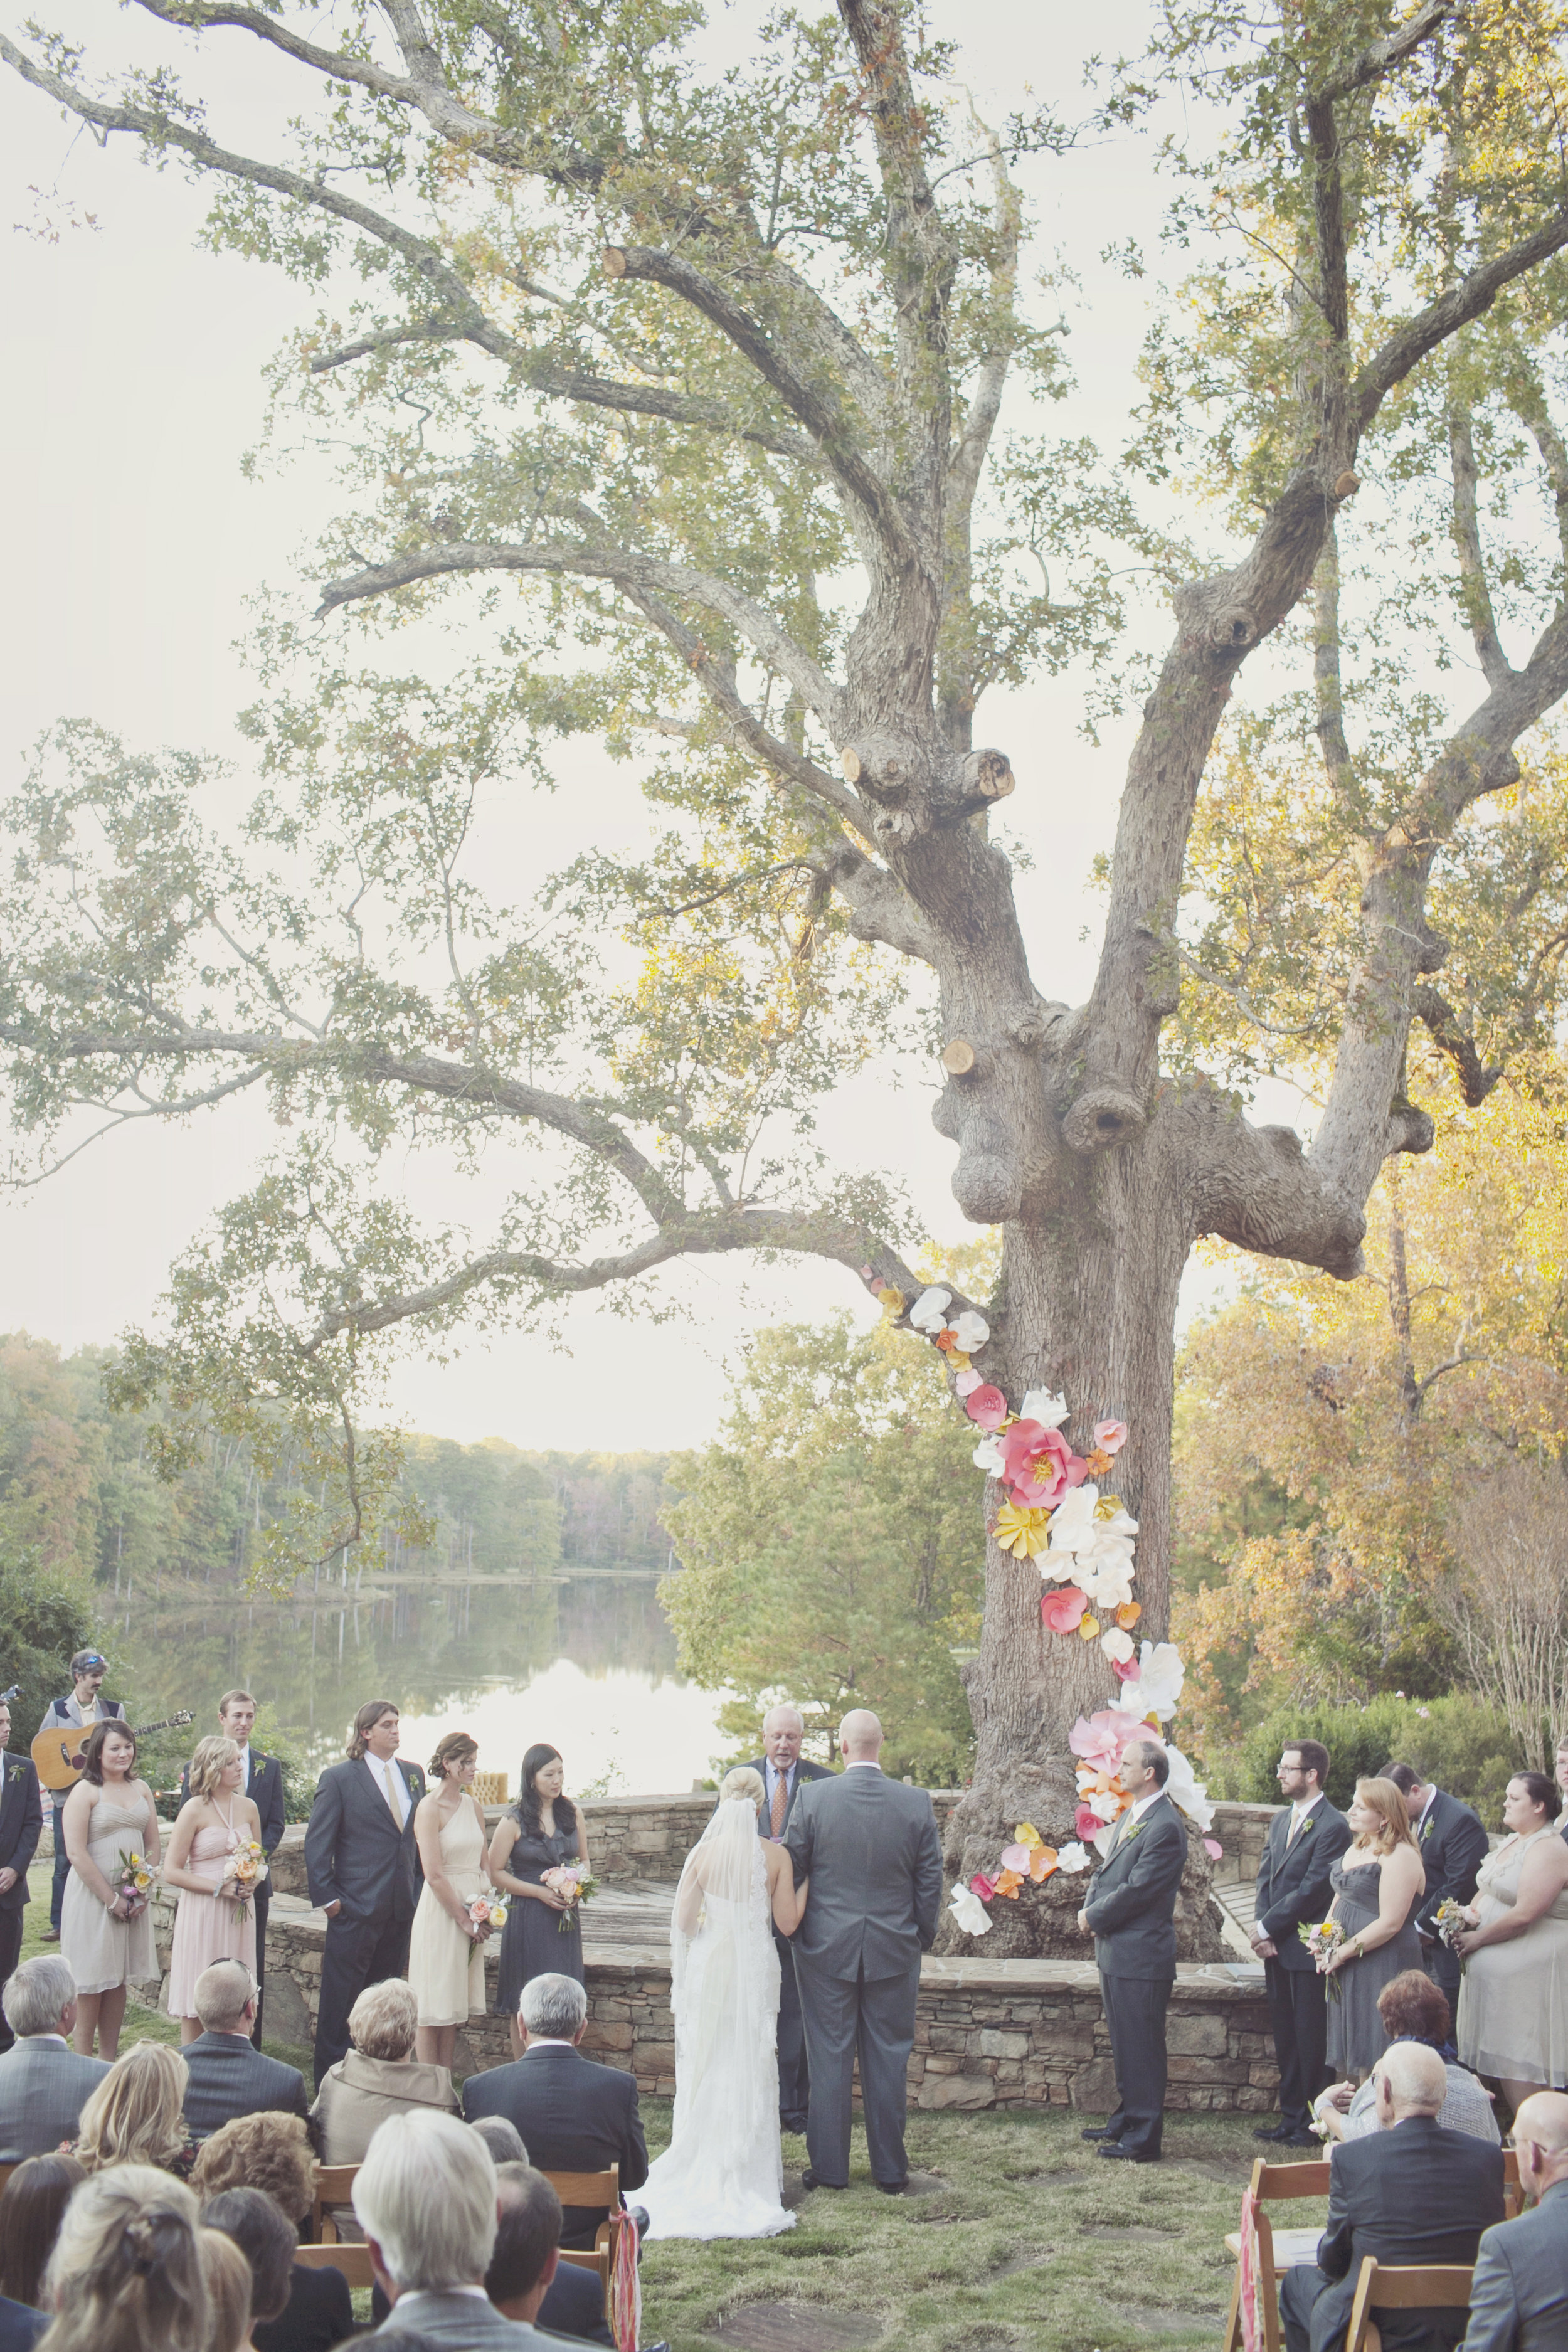 Outdoor Wedding Ceremony with Large Tree floral installation  | Simply Charming Socials | Atlanta Wedding Planner